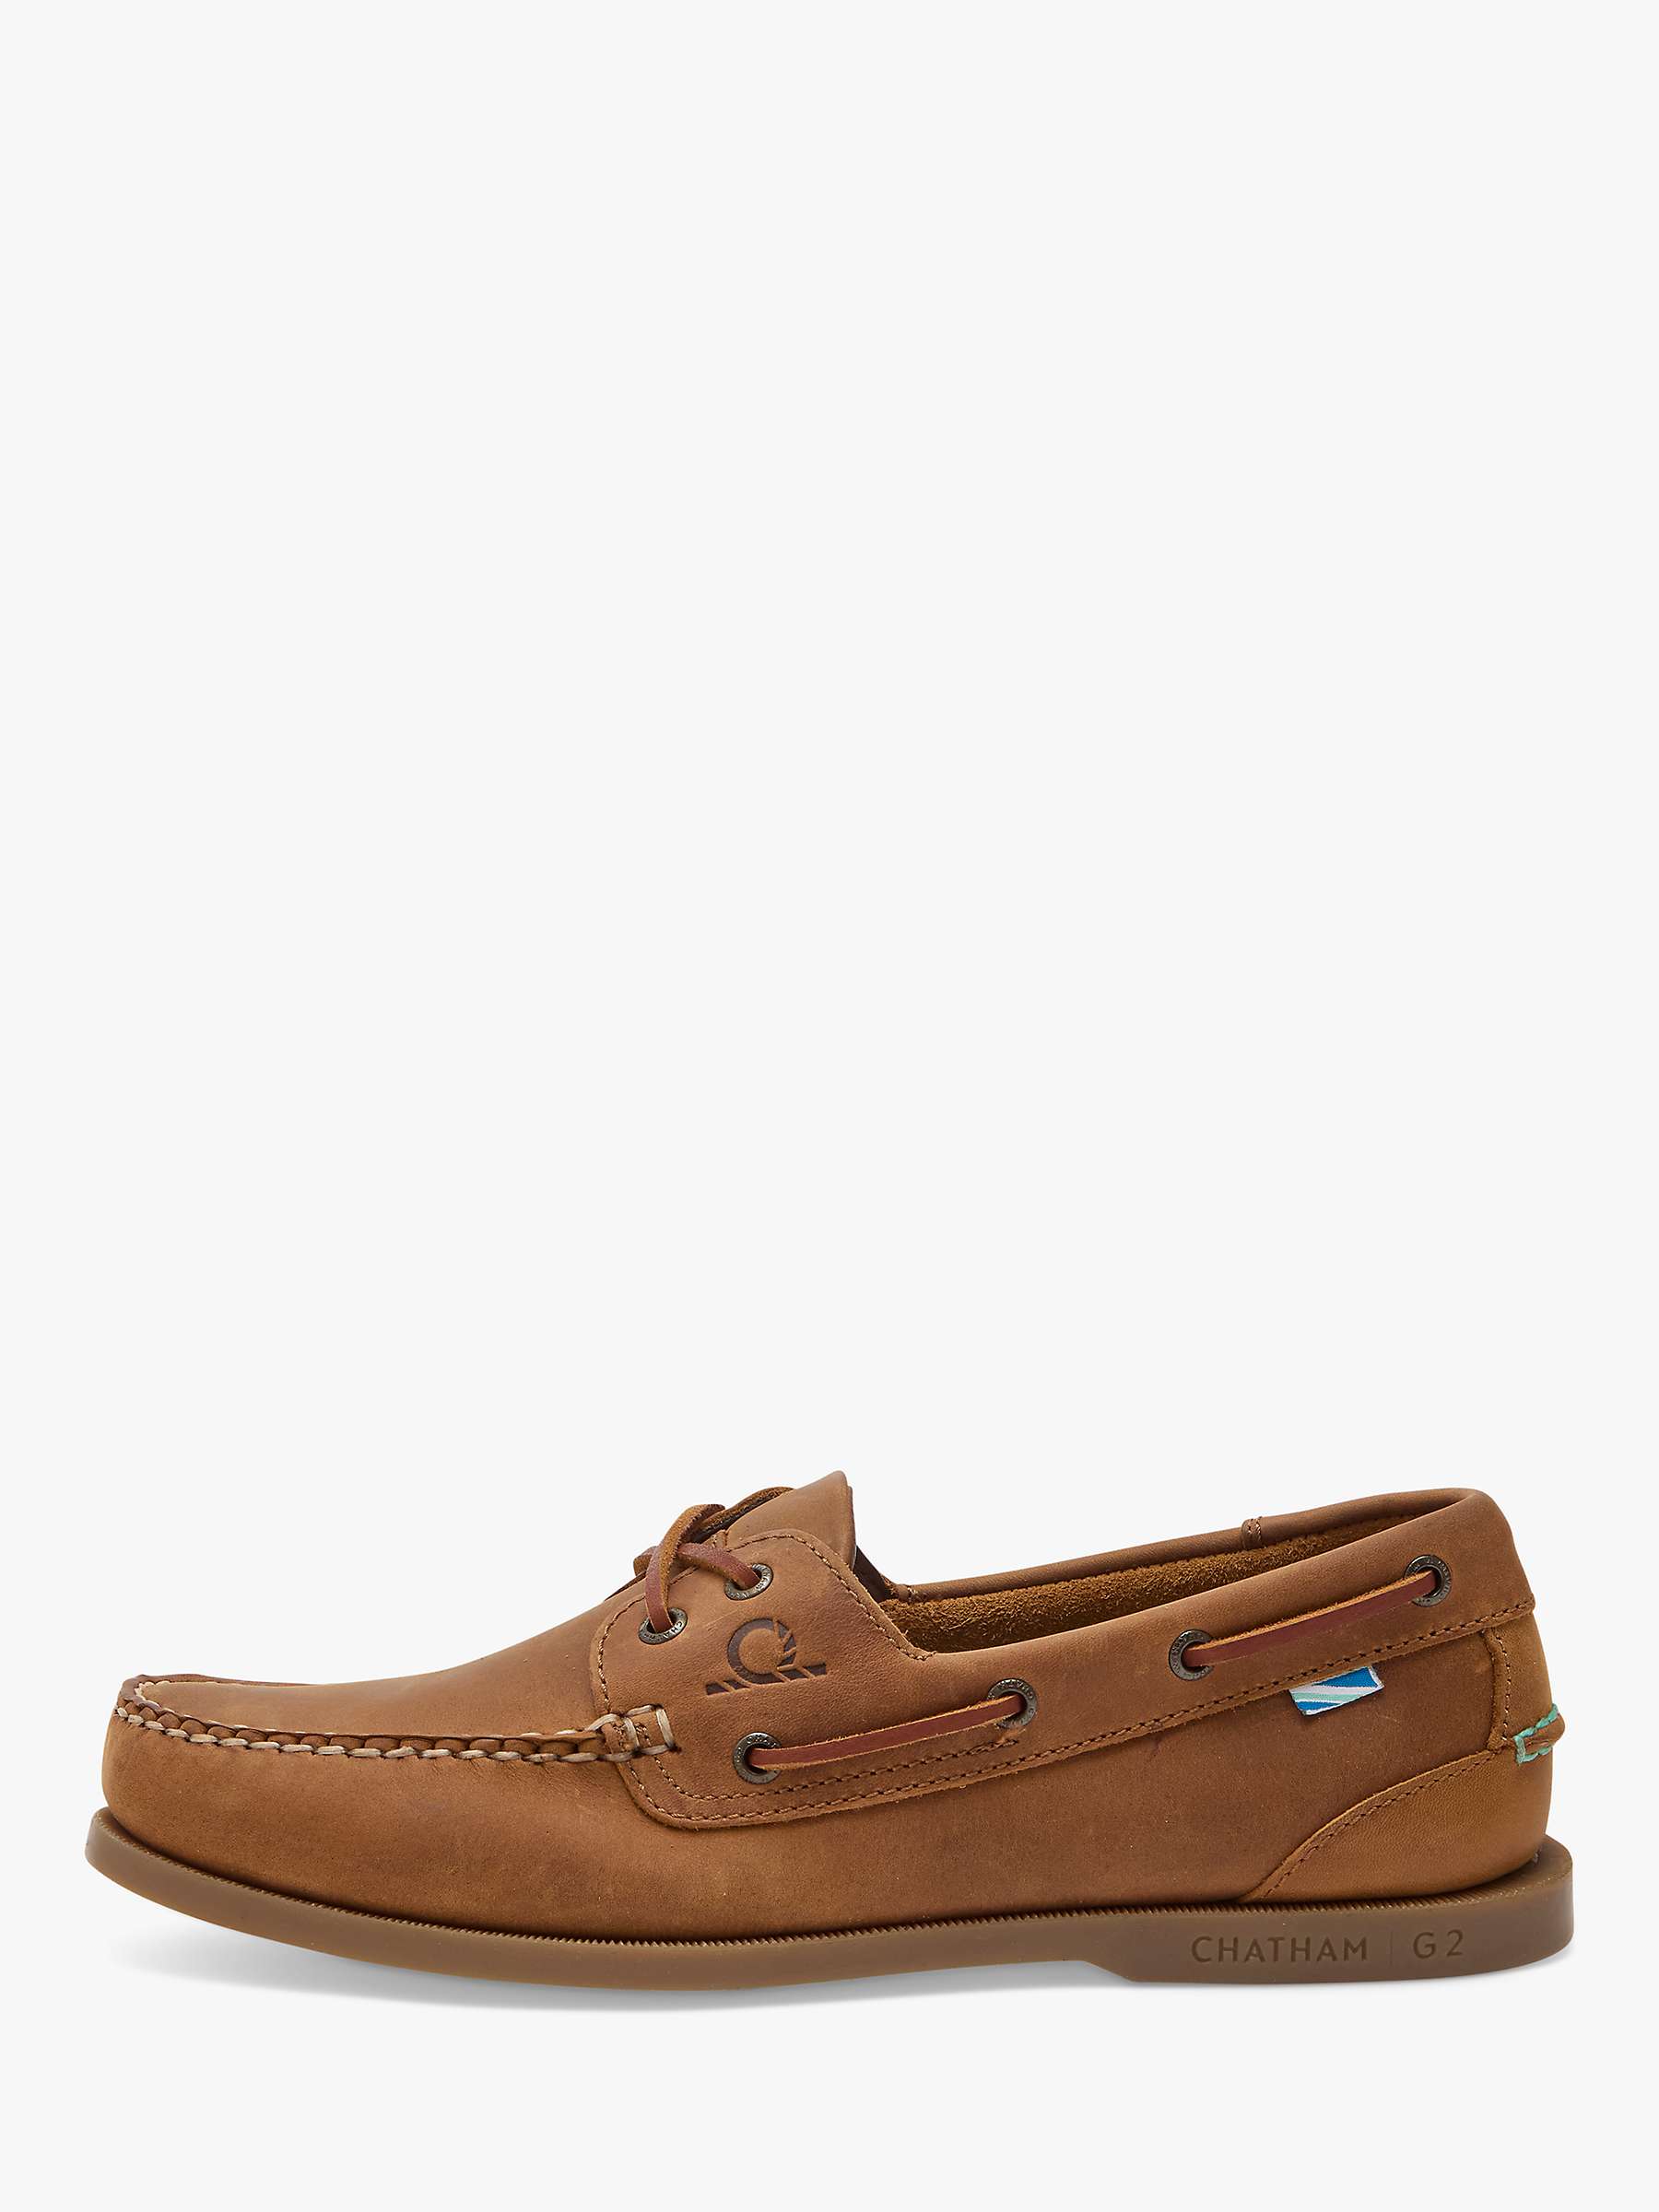 Buy Chatham Deck II G2 Leather Boat Shoes Online at johnlewis.com